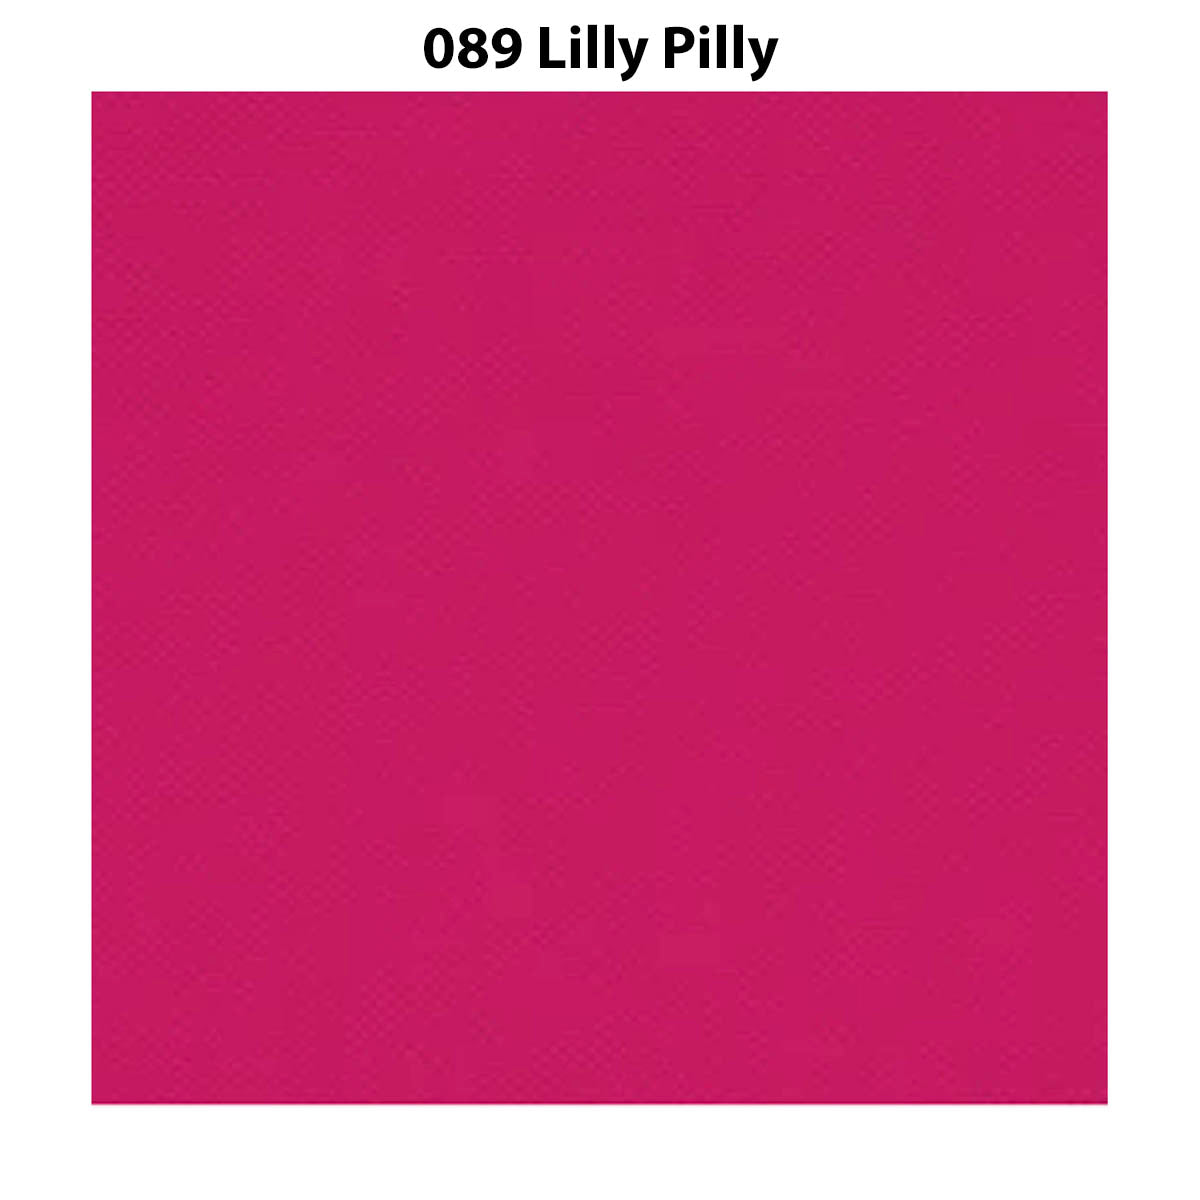 D/S Devonstone Solids - 089 Lilly Pilly